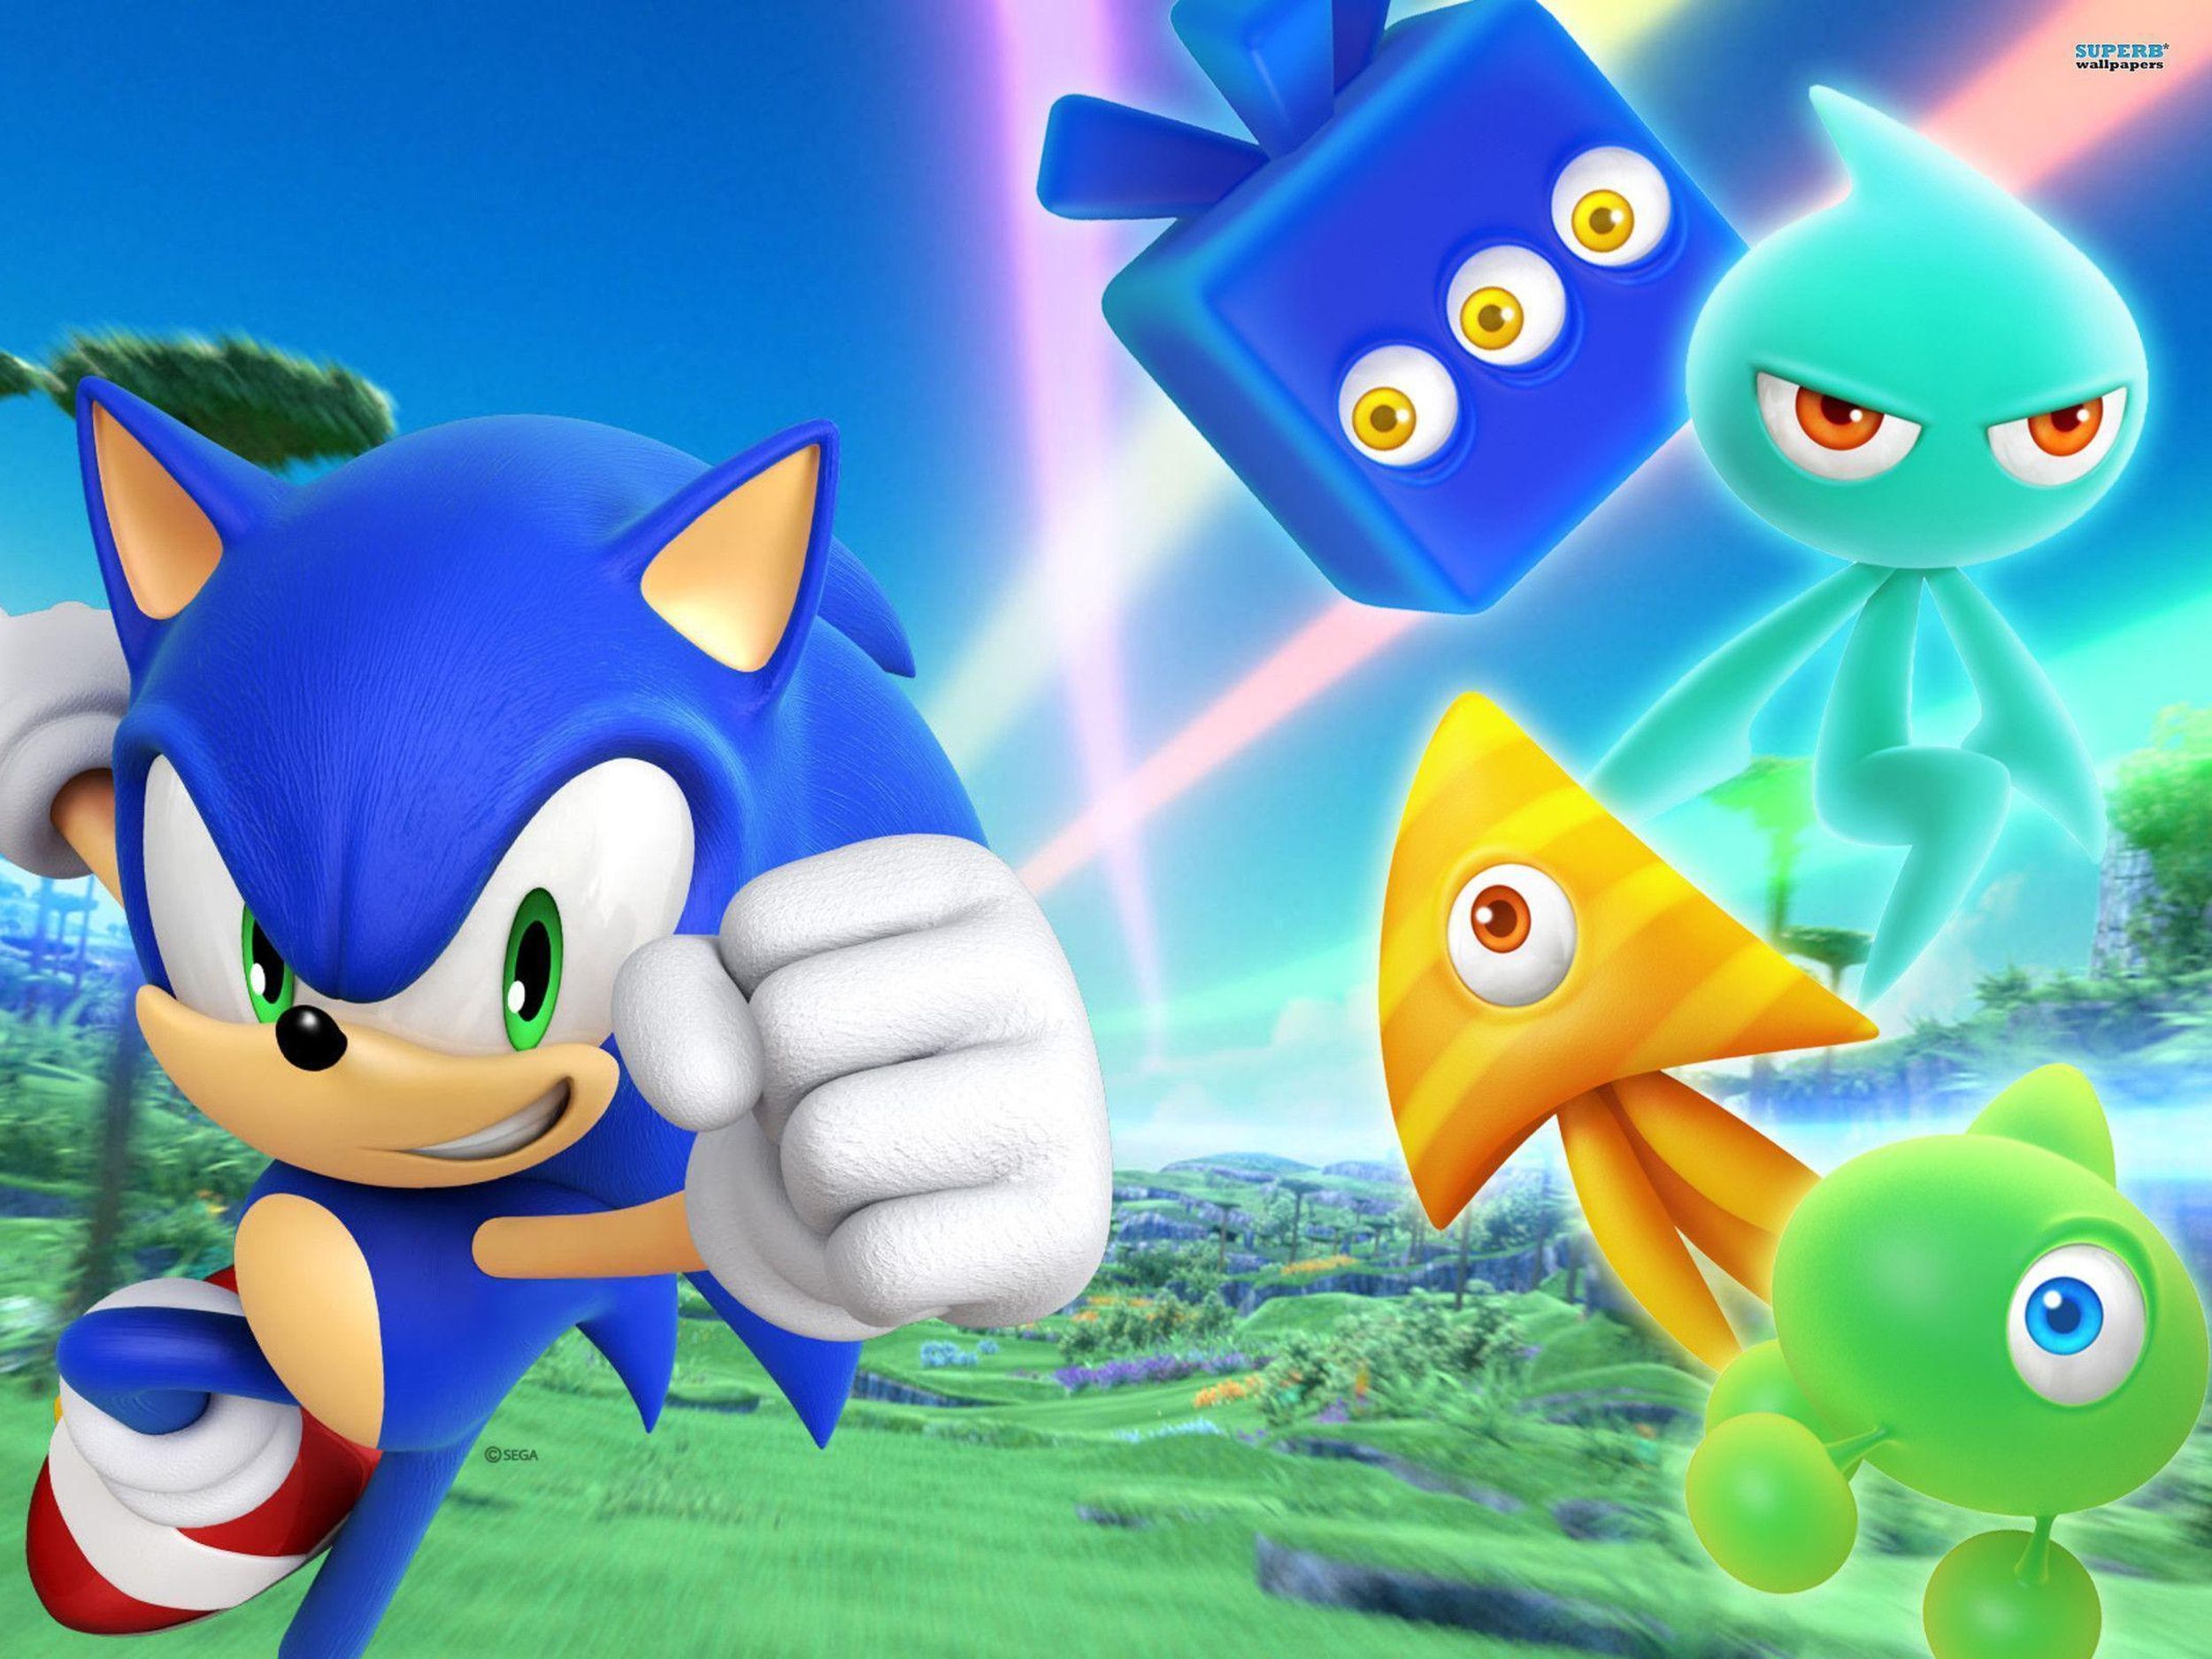 New, Fan-Made Sonic Game Is Better Than Sonic 4